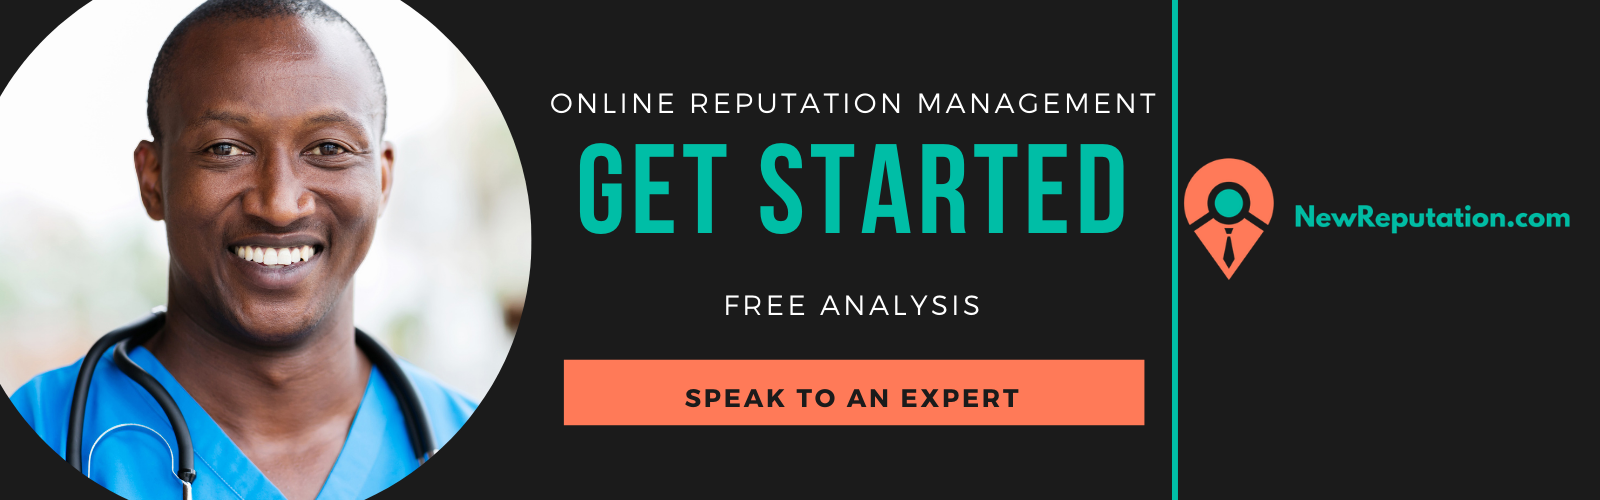 personal online reputation management company